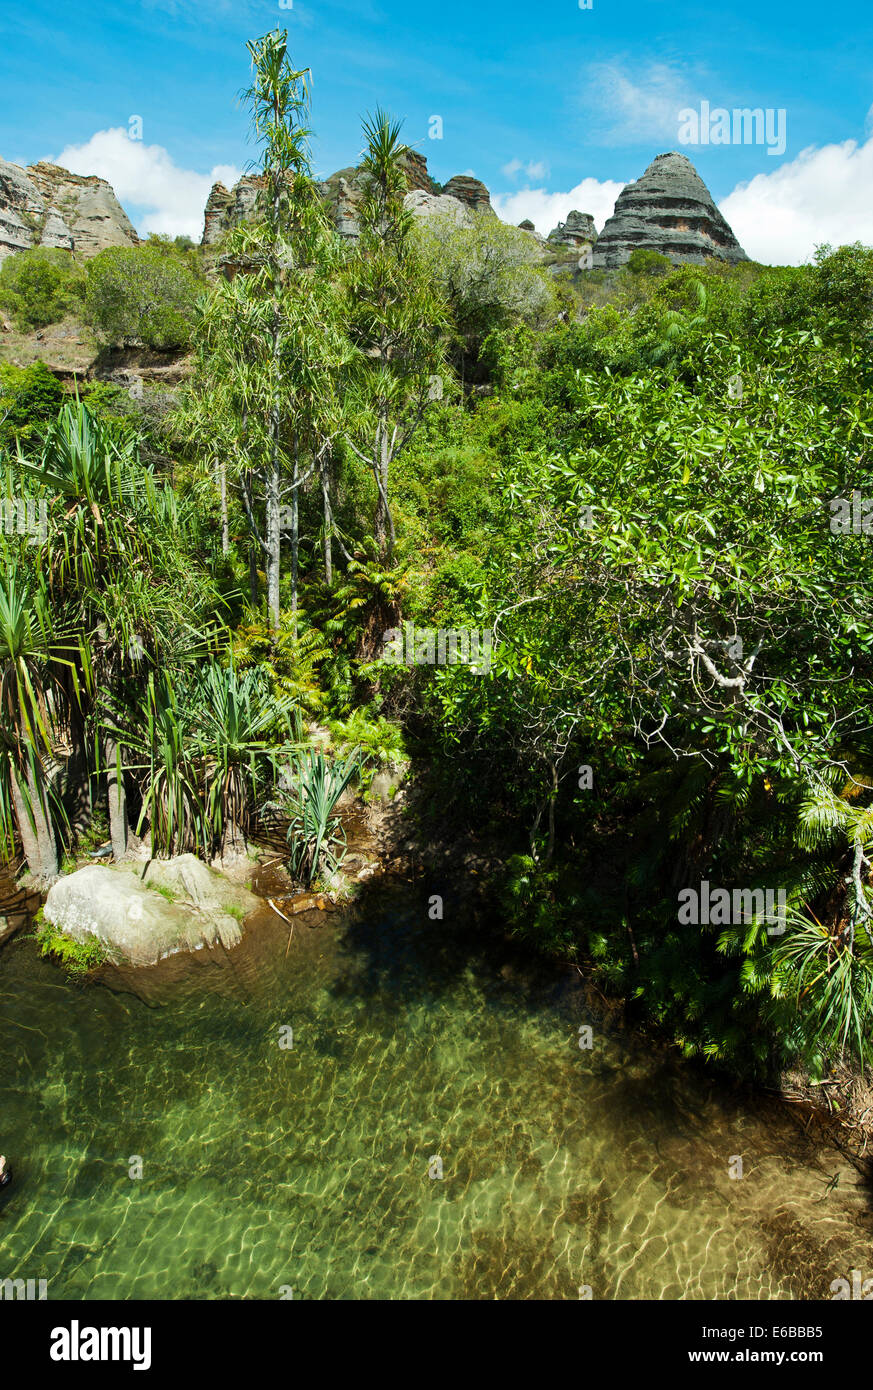 Madagascar, National Park of Isalo, green natural swimming pool in the piscine naturelle circuit. Stock Photo